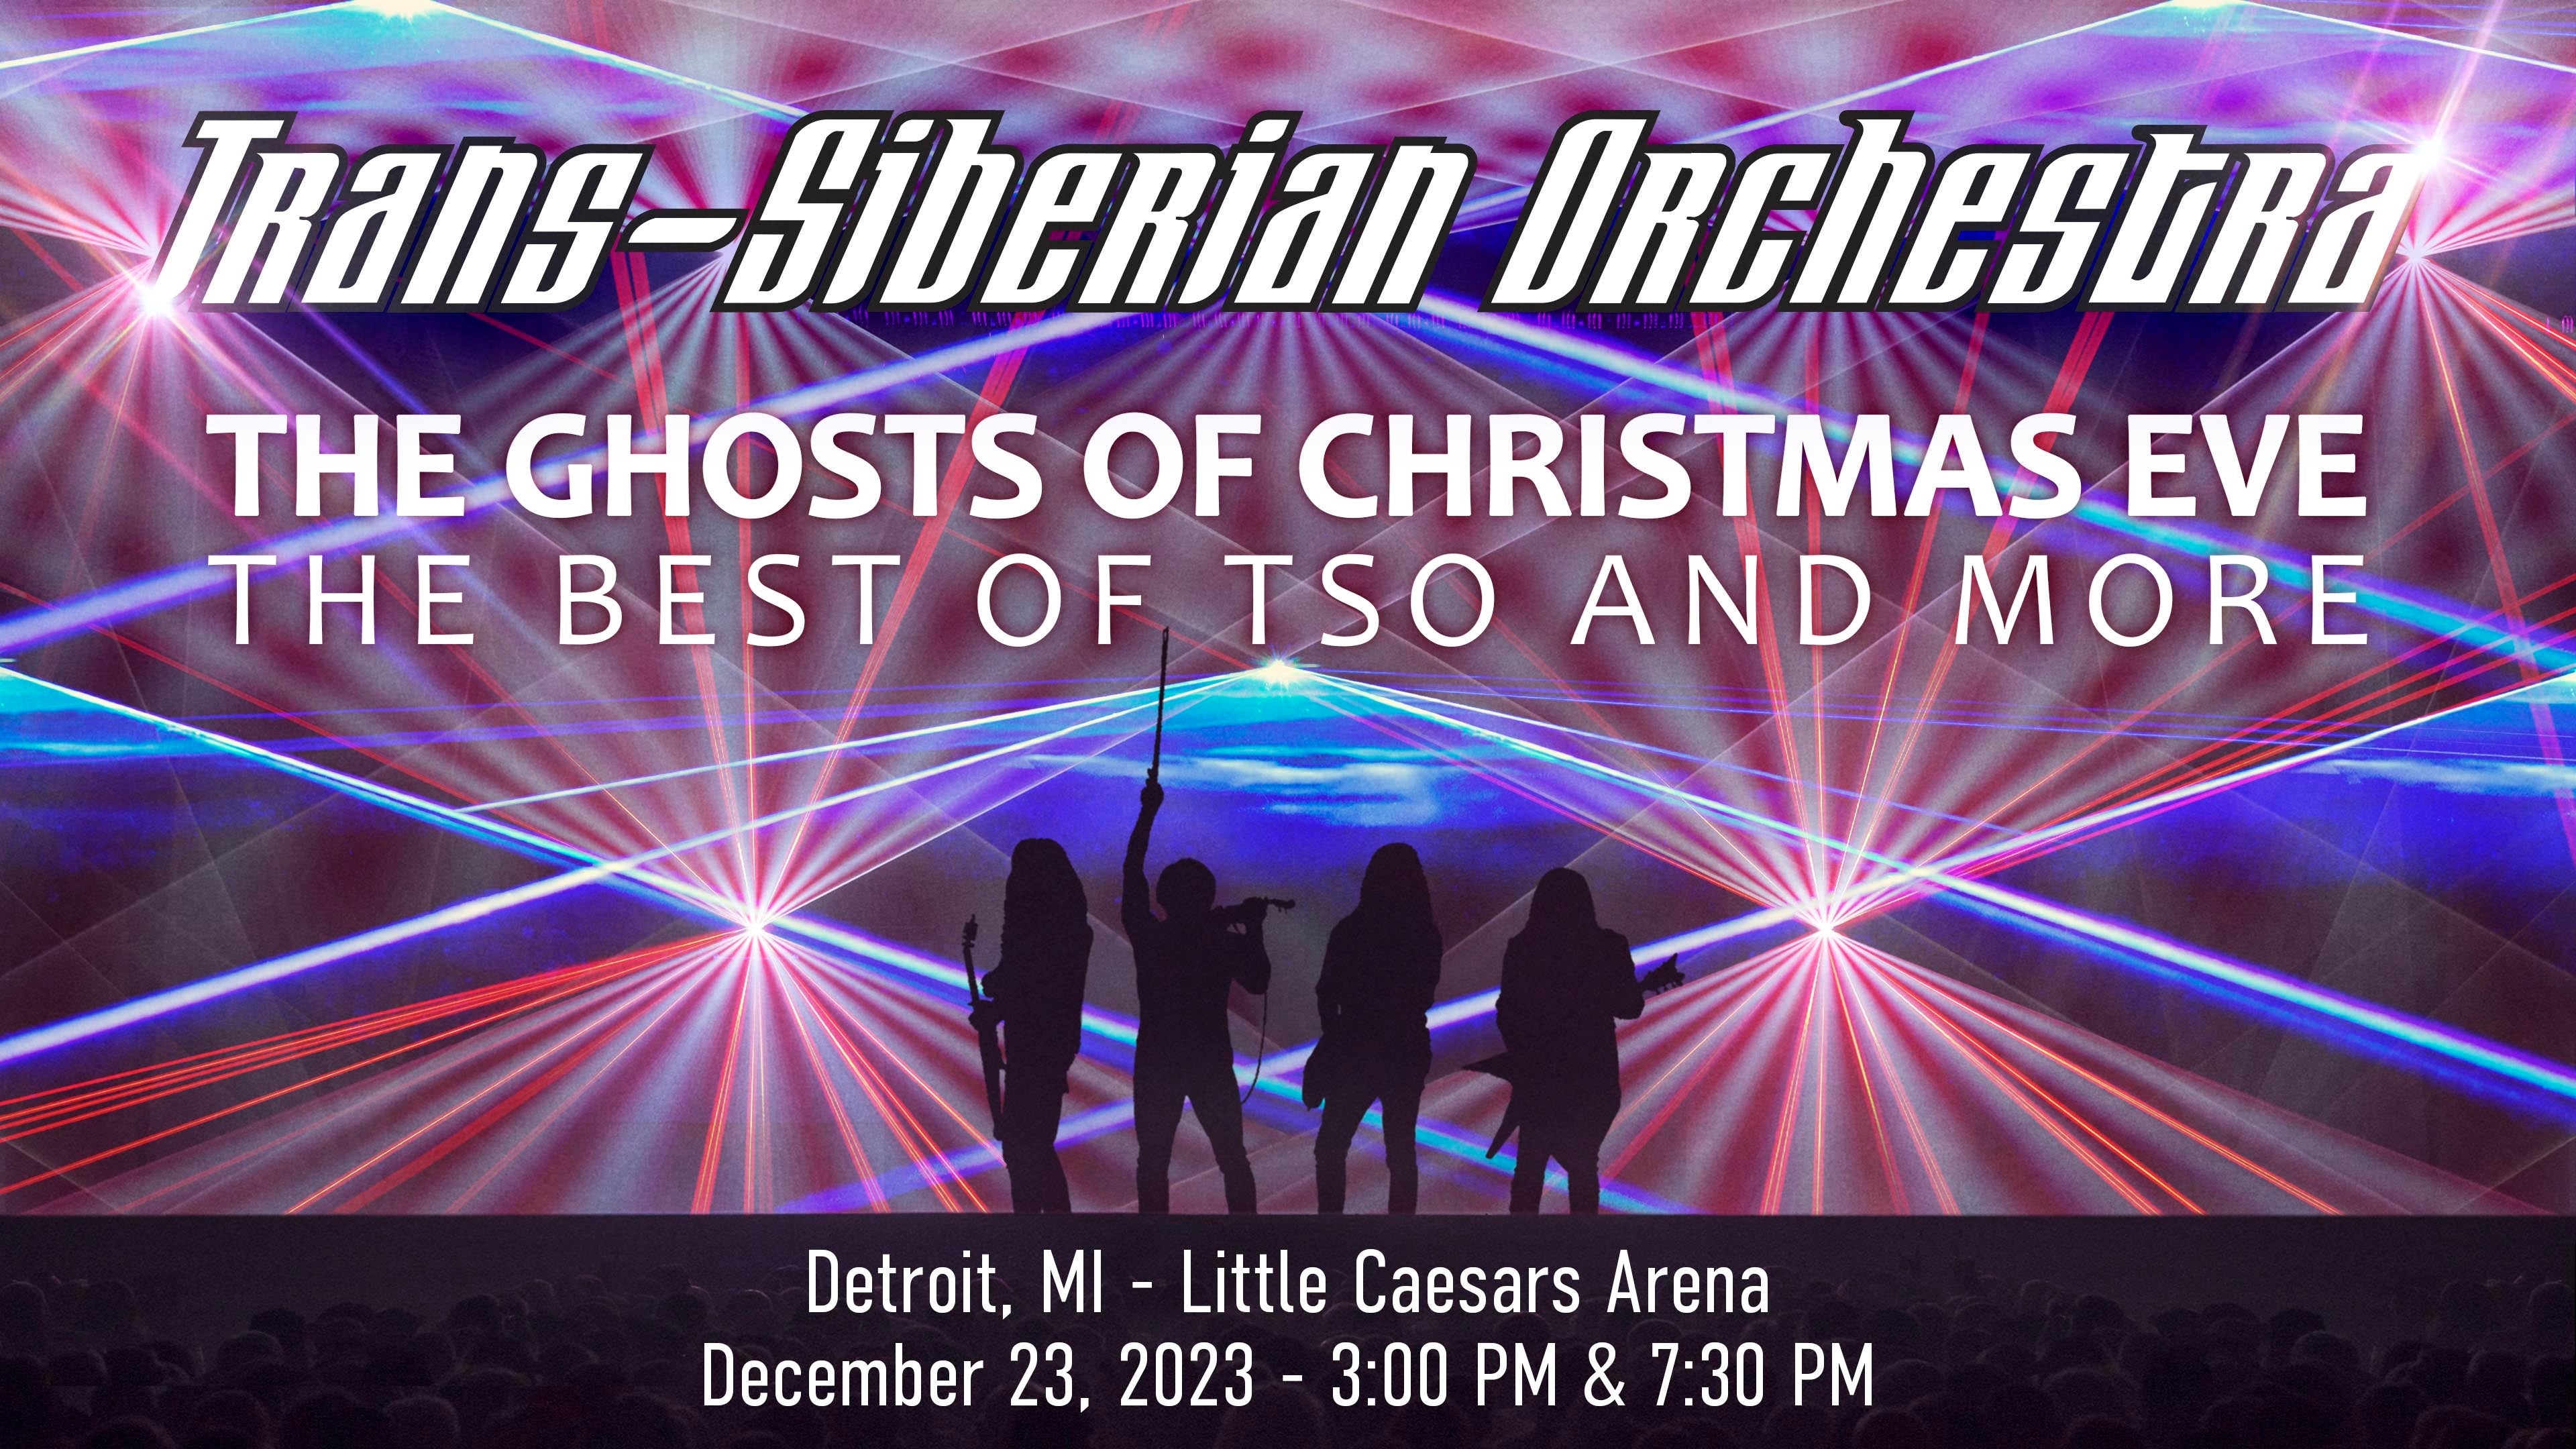 Trans-siberian Orchestra Announces “the Ghosts Of Christmas Eve 